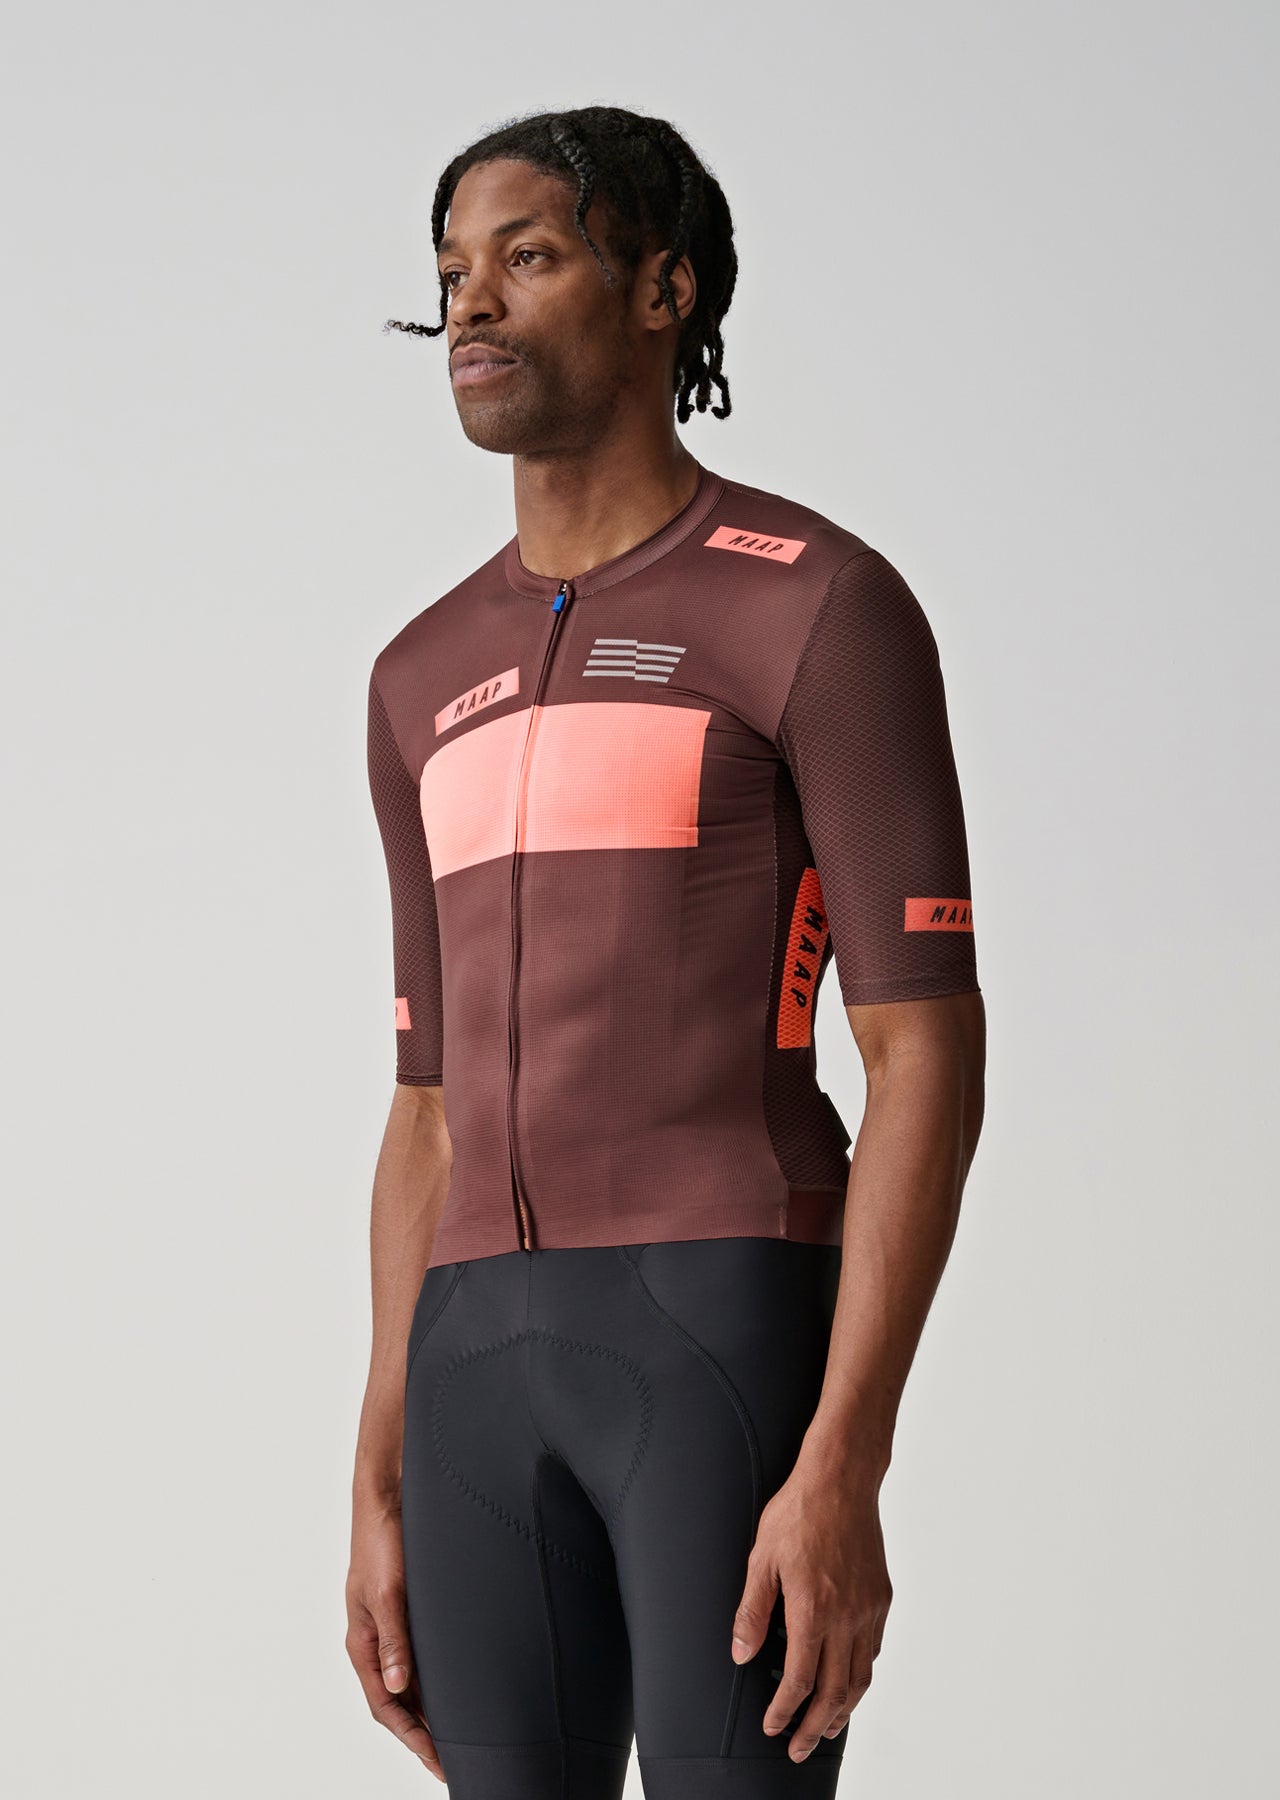 System Pro Air Jersey - MAAP Cycling Apparel